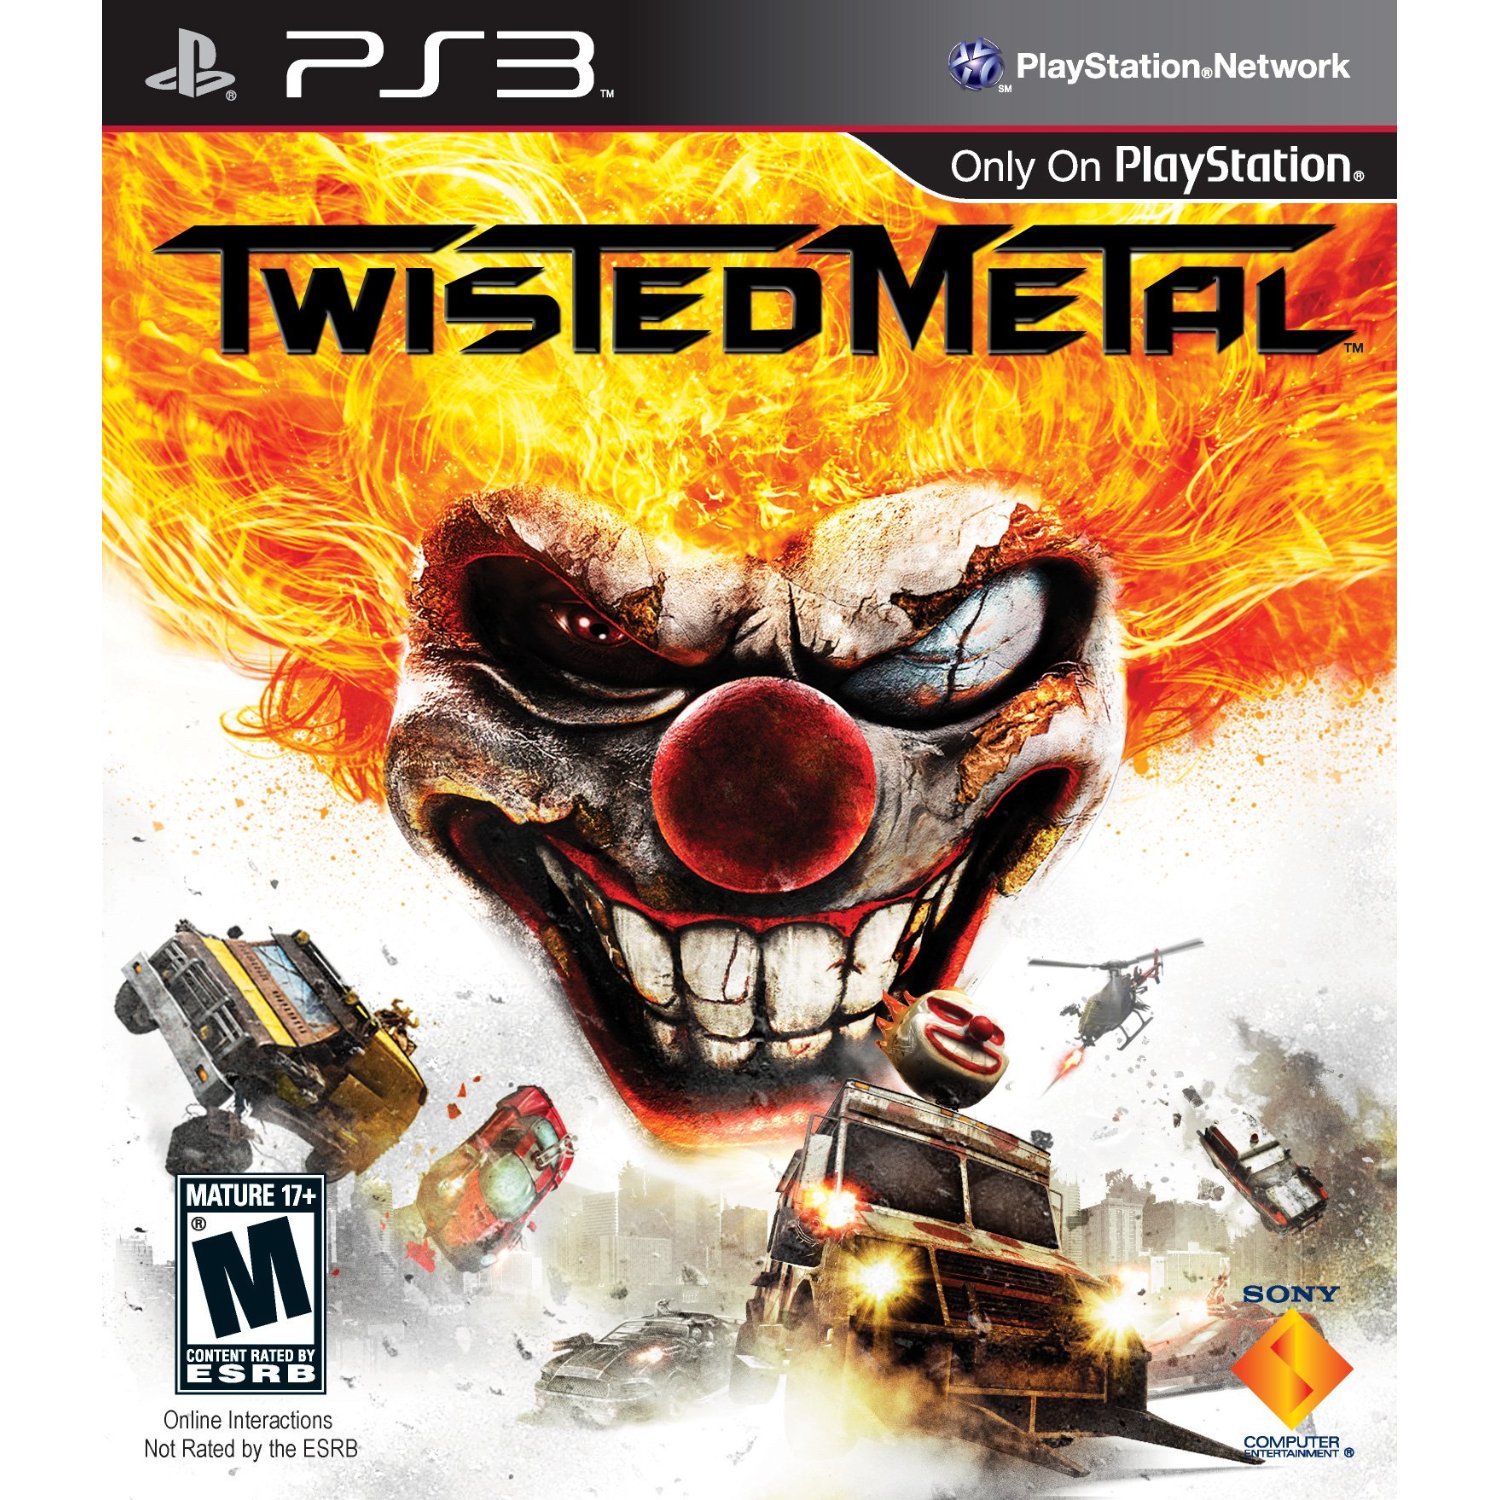 http://thetechjournal.com/wp-content/uploads/images/1204/1334349686-twisted-metal--ps3-game-review-1.jpg